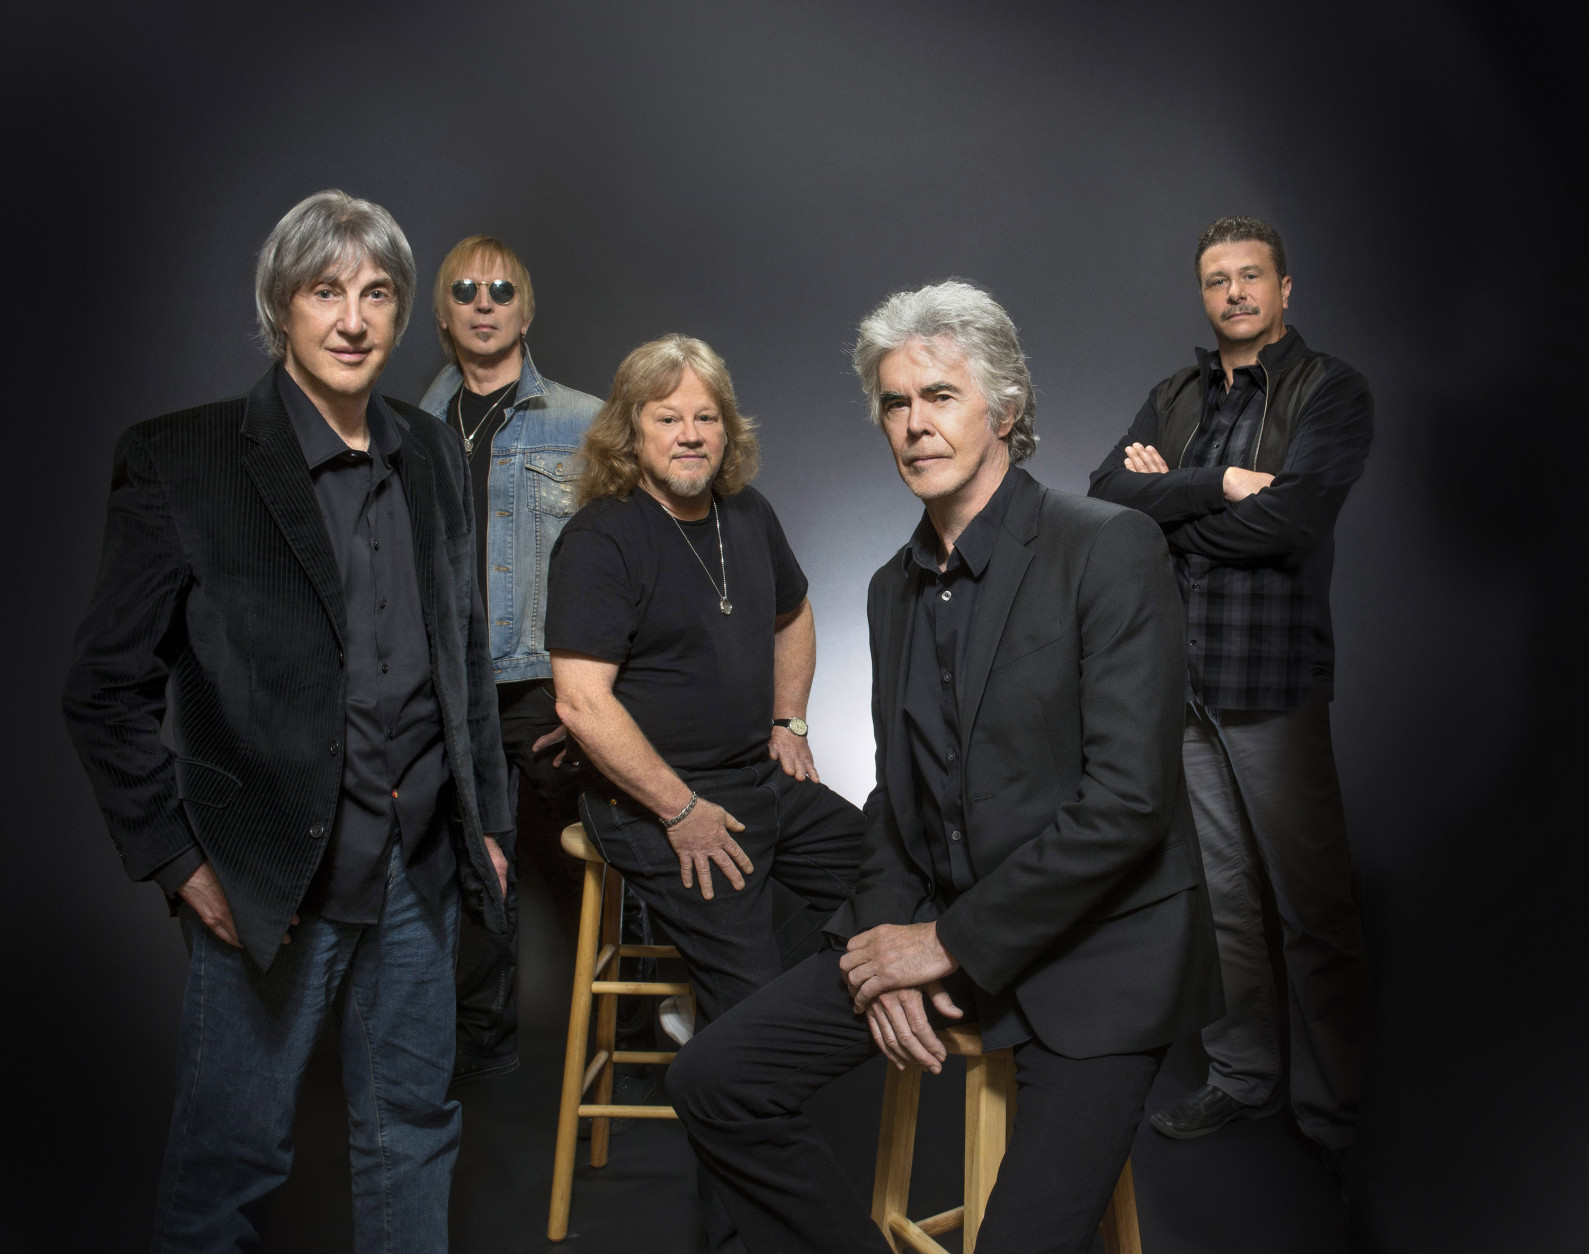 This June 2014 photo provided by Three Dog Night shows, band members, Cory Wells, from left, Paul Kingery, Michael Allsup, Danny Hutton, and Pat Bautz of the music group, Three Dog Night, posing for a portrait, in Las Vegas. Wells, a founding member of the popular 1970s band and lead singer on such hits as "Never Been to Spain" and "Mama Told Me (Not to Come)," has died at age 74. Wells, pictured in the forefront, experienced acute back pain weeks ago and died suddenly Tuesday, Oct. 20, 2015, in Dunkirk, where he had lived, bandmate Hutton said.  (Steve Spatafore/Three Dog Night via AP)